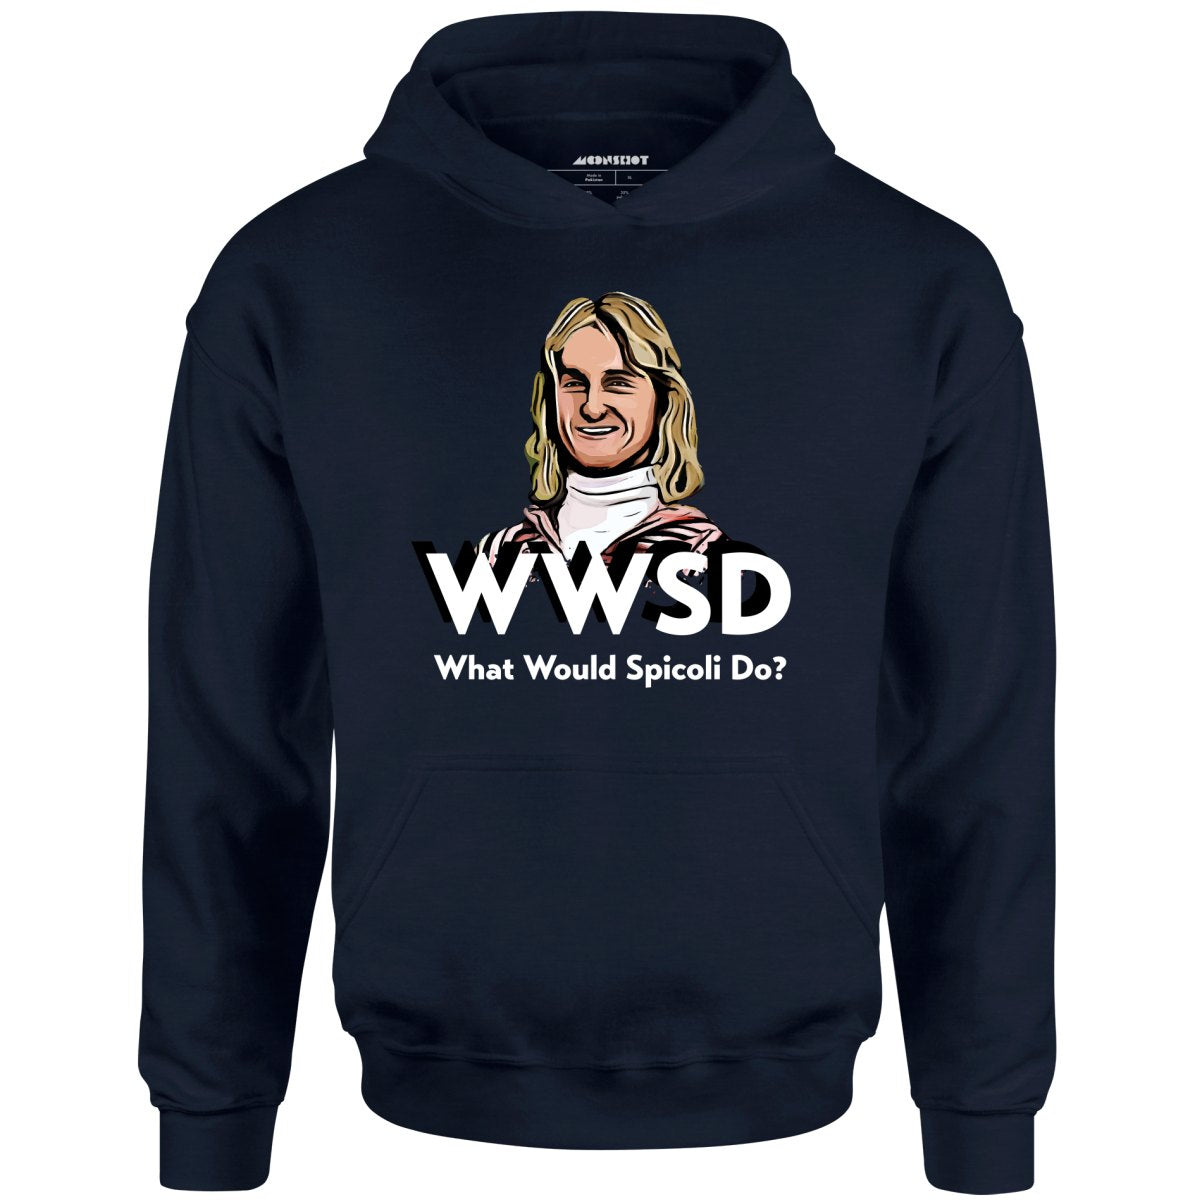 What Would Spicoli Do? - Unisex Hoodie